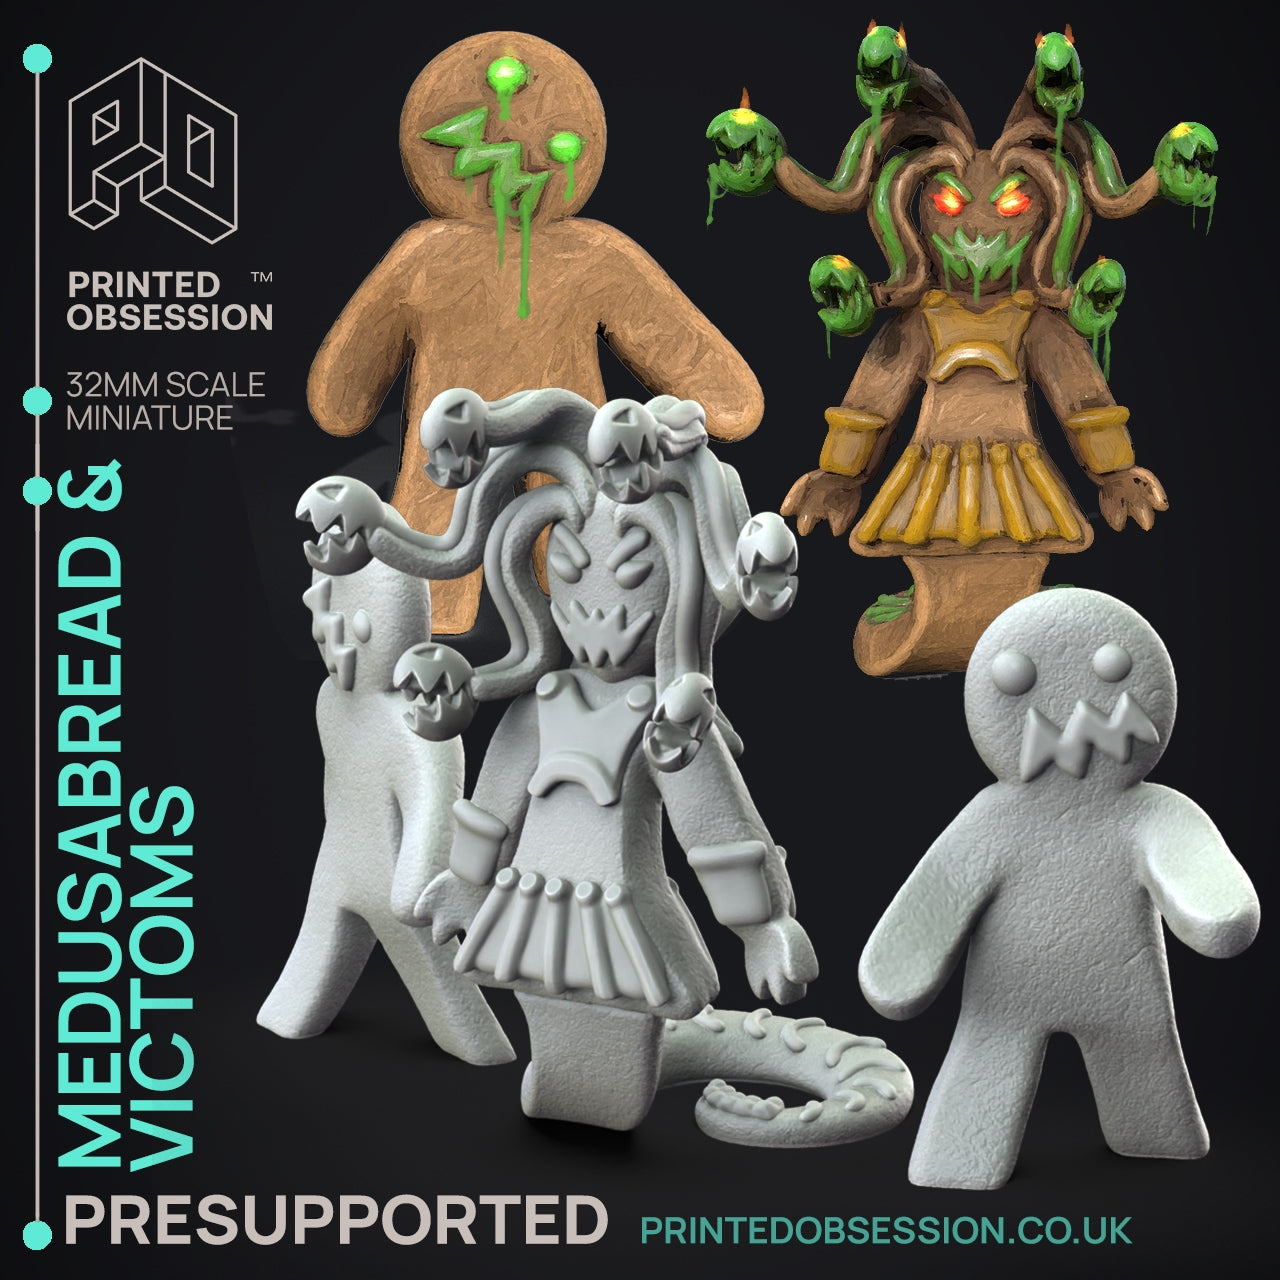 Medusabread lady and Victims - The Possessed Bakery - The Printed Obsession - Table-top mini, 3D Printed Collectable for painting and playing!